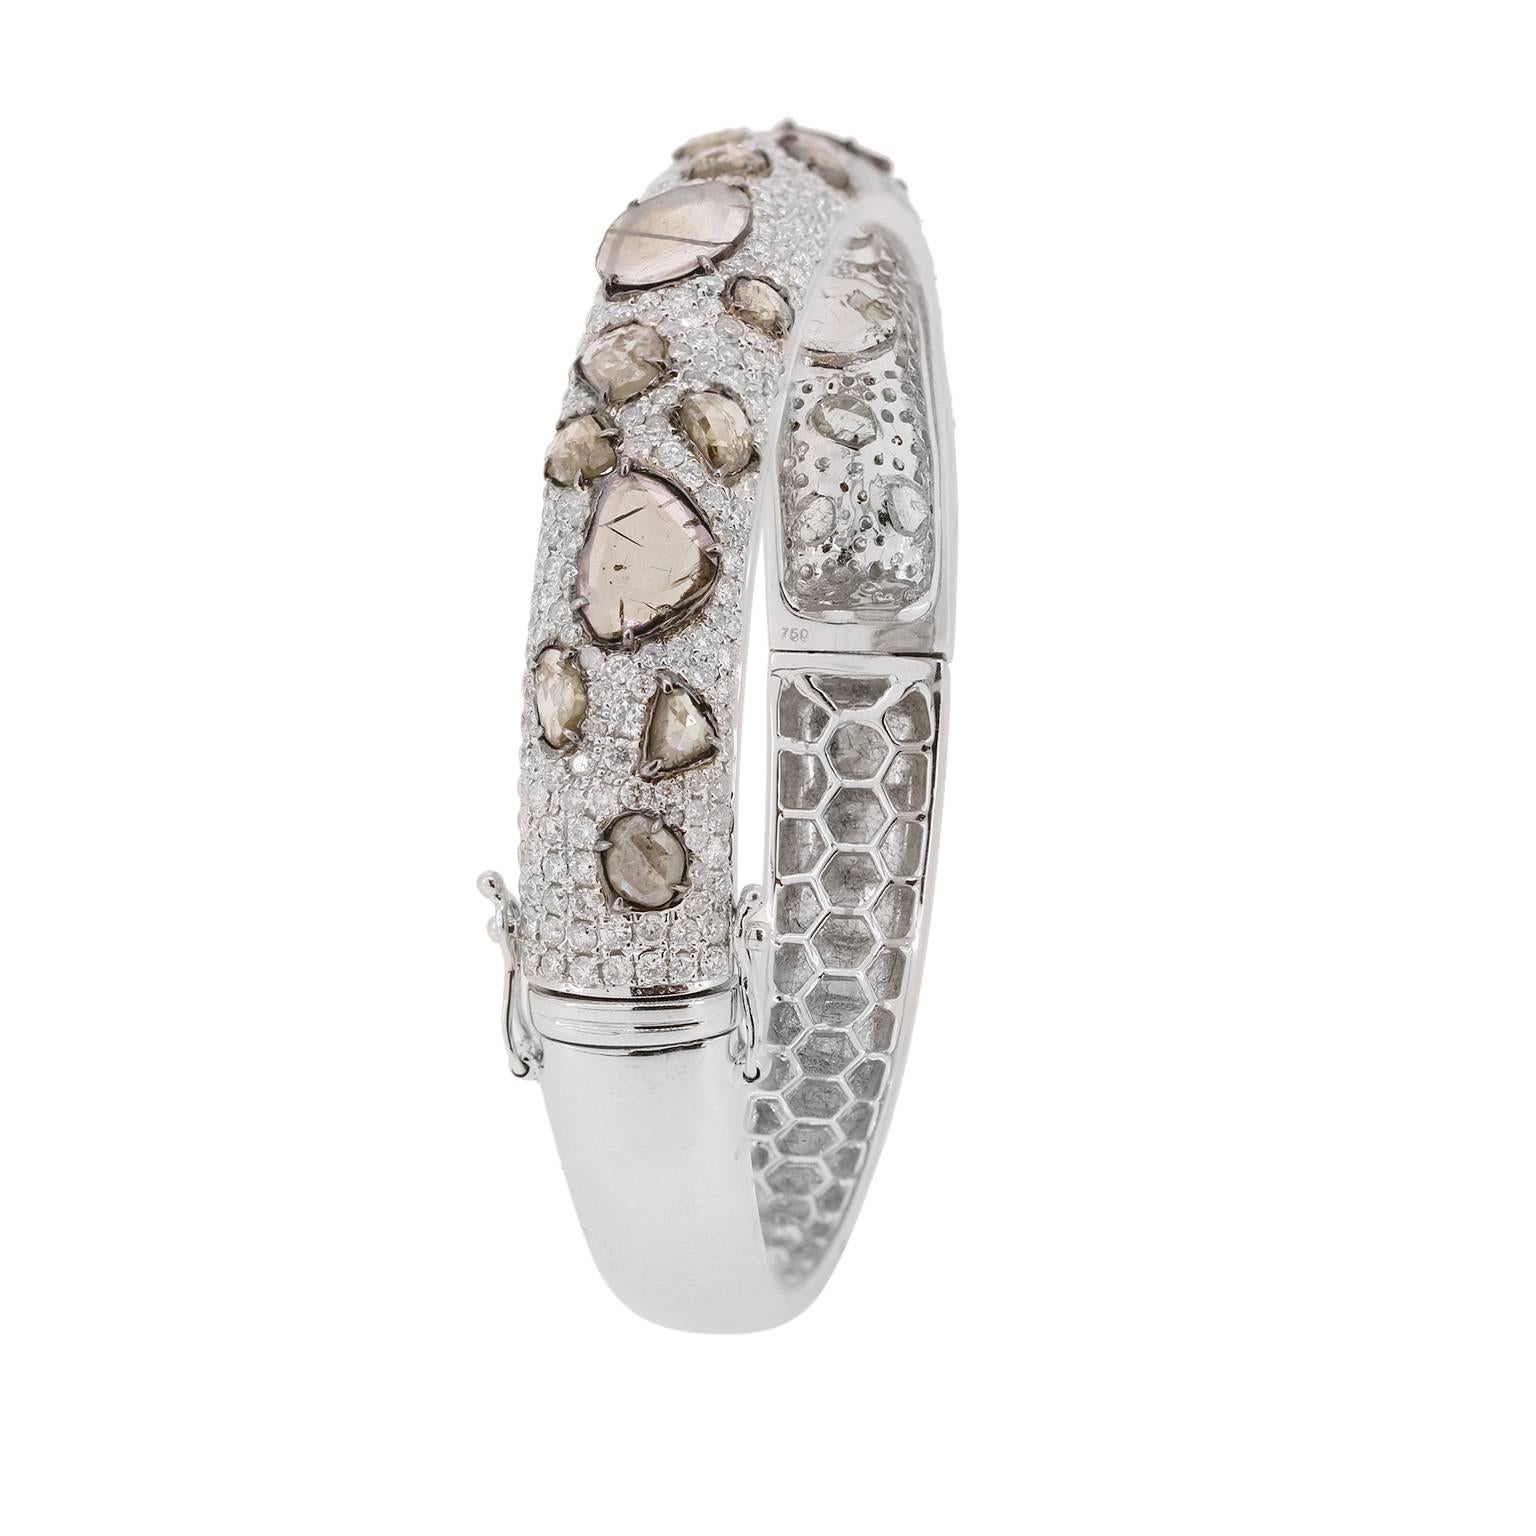 This fabulous diamond bangle has 4 larger sliced diamonds (1.38cts) on the front of the bangle that is surrounded by diamond pave (2.95cts) and smaller sliced diamonds (1.94cts). This bangle is finished beautifully with an under-gallery for comfort.